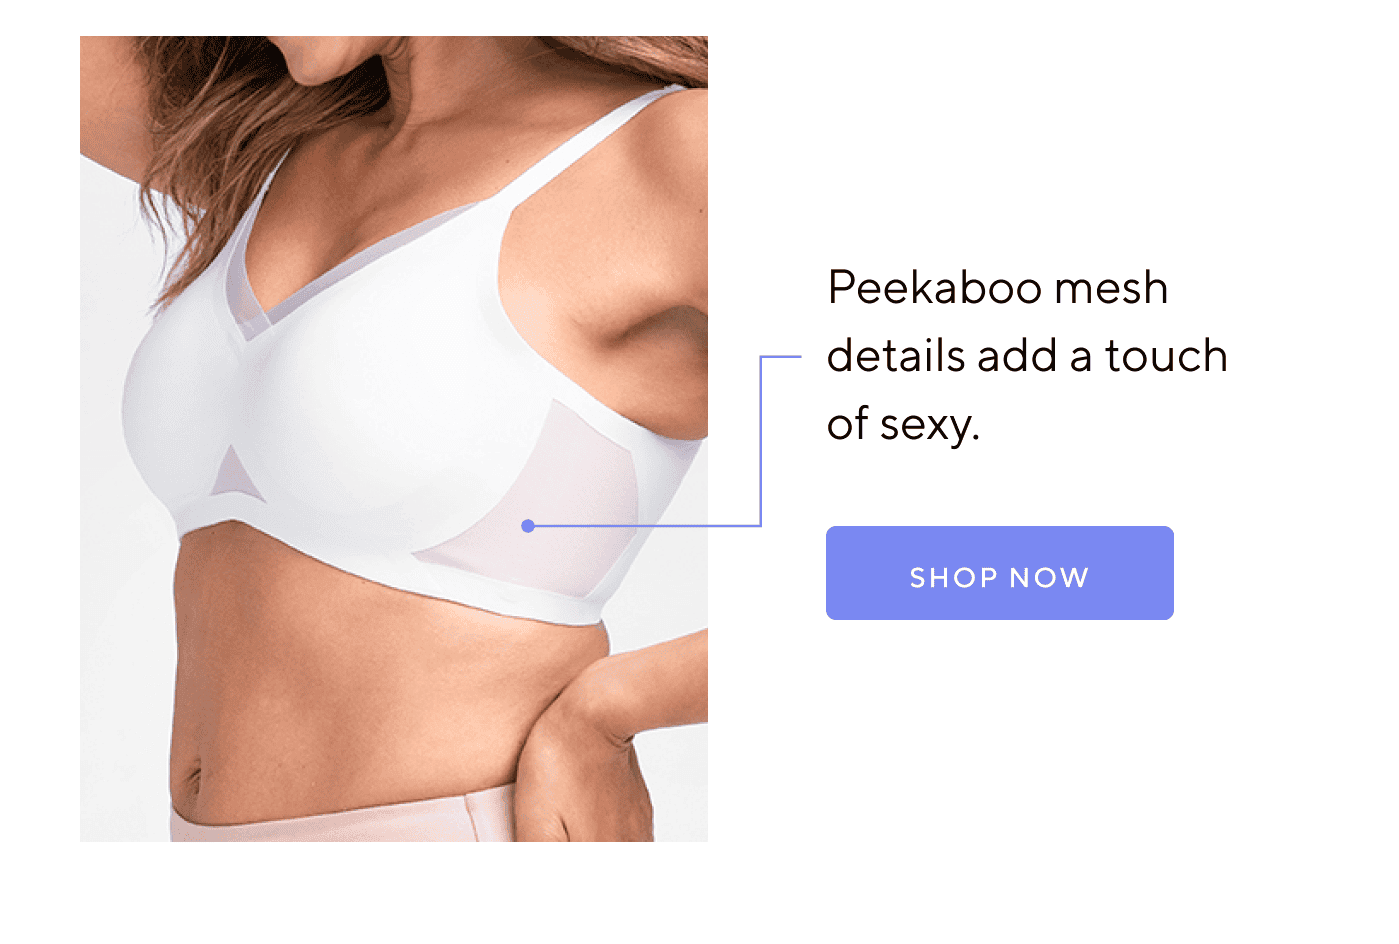 Peekabook mesh details add a touch of sexy. | SHOP NOW 